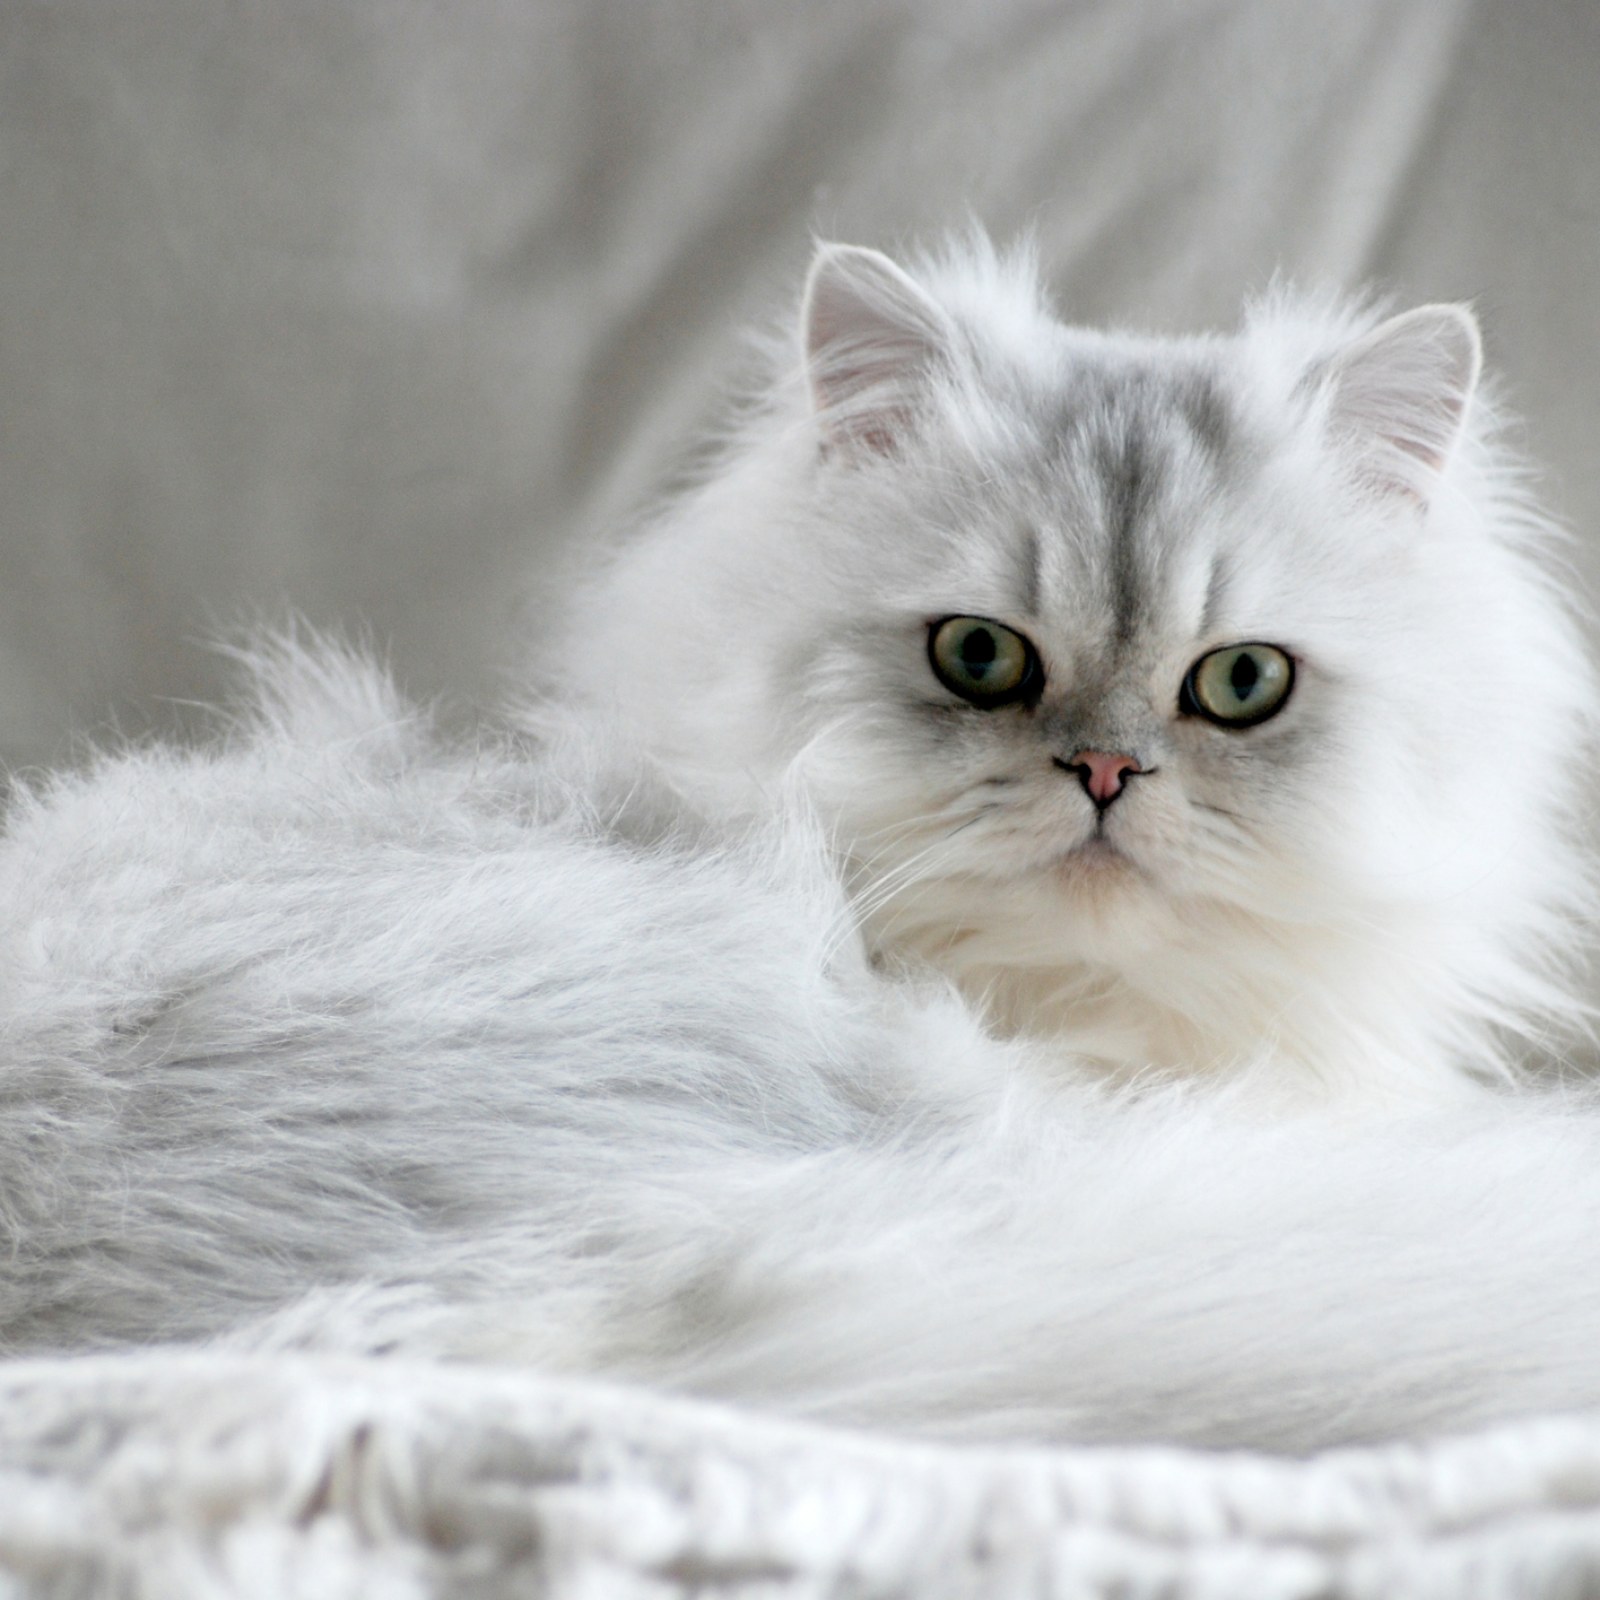 17 Cute Long-Haired Cat Breeds